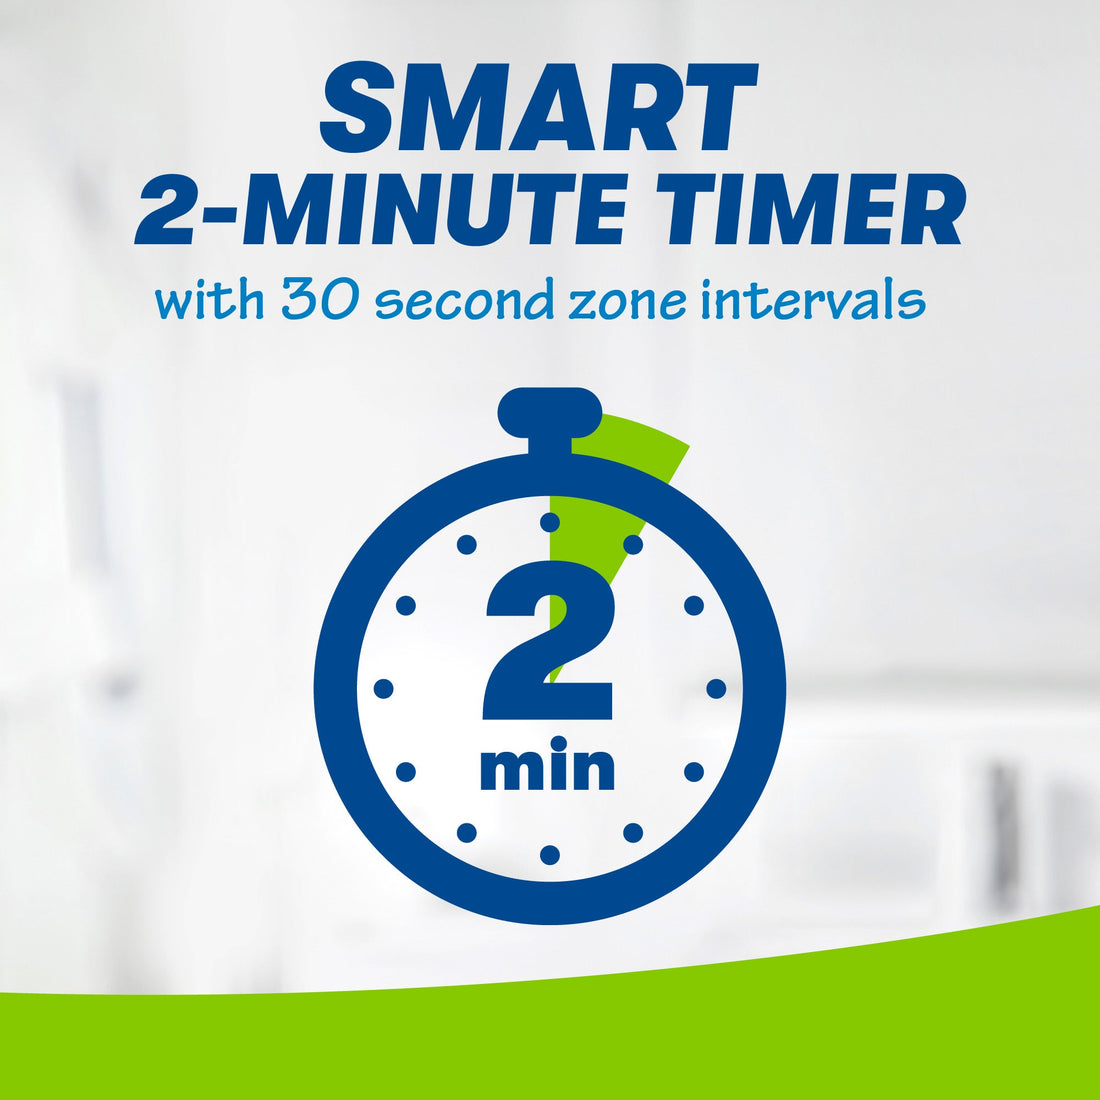 Icon of a watch displaying 2 min, SMART 2-minute timer with 30 second zone intervals